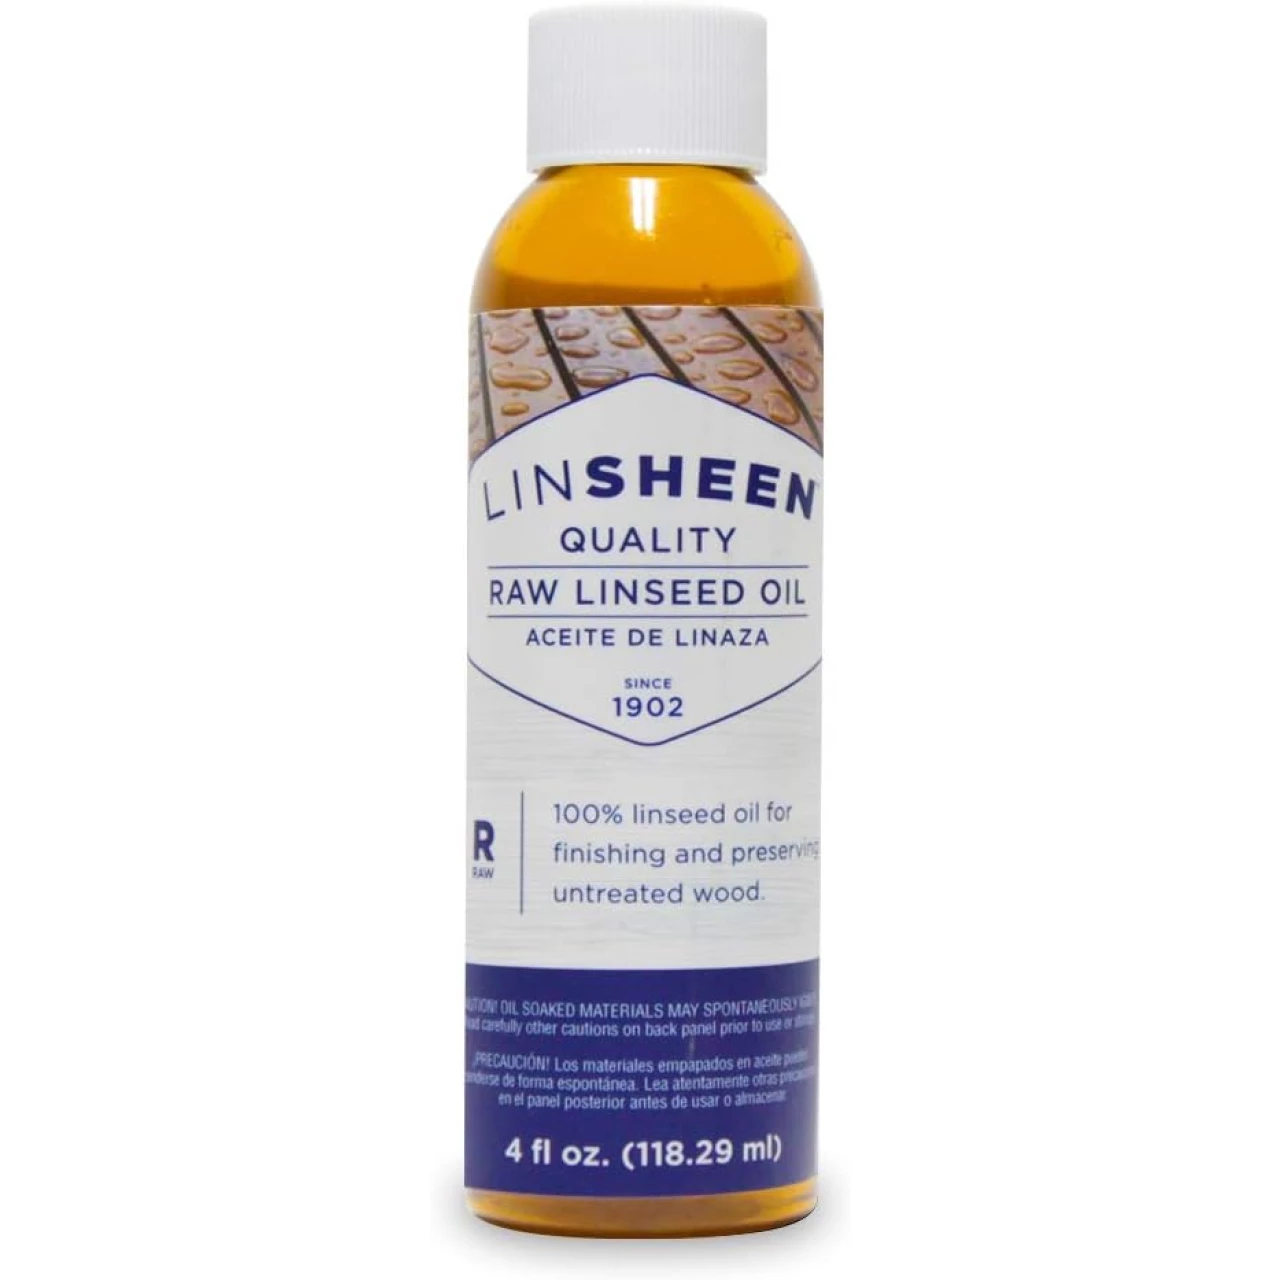 LinSheen Raw Linseed Oil – Flaxseed Wood Treatment Conditioner